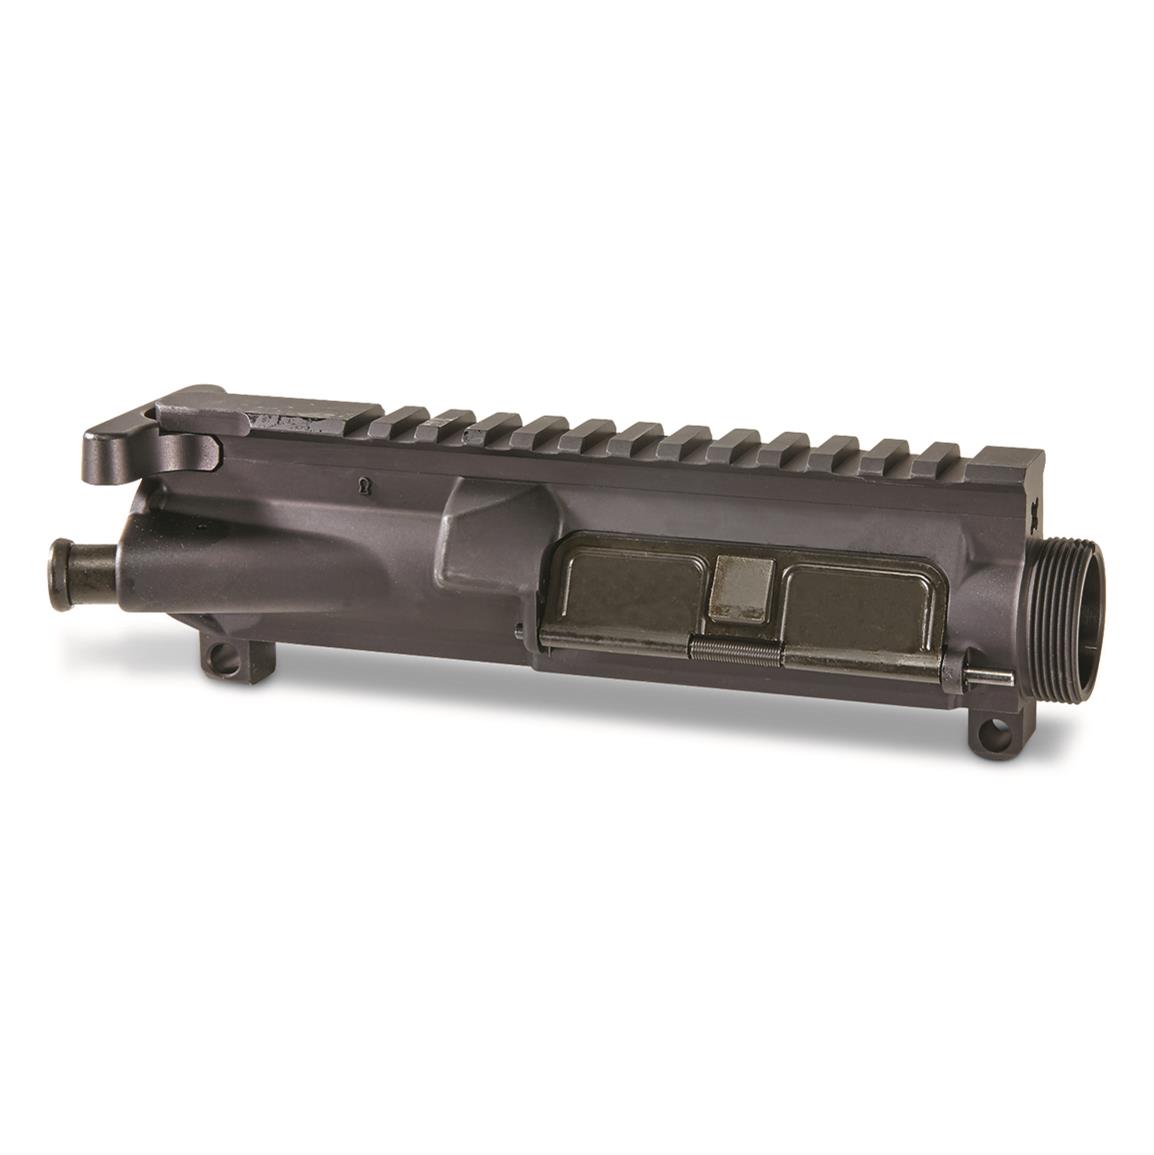 Anderson AR-15 Stripped Upper Receiver, Multi-Caliber, Charging Handle and Forward Assist